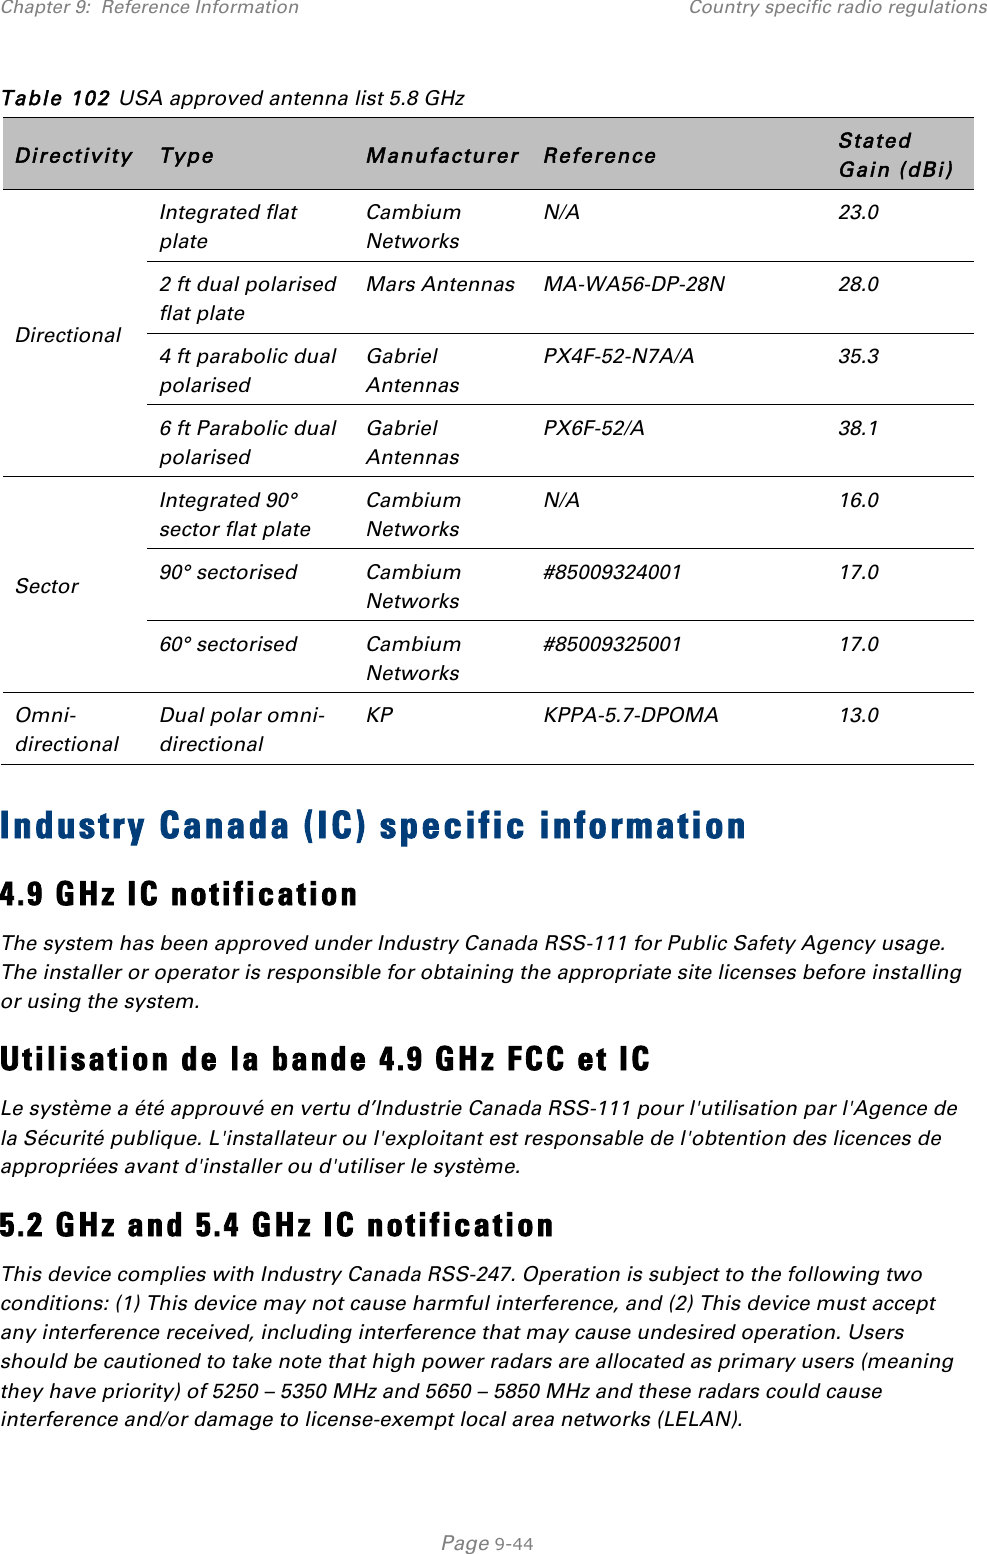 Chapter 9:  Reference Information Country specific radio regulations   Page 9-44 Table 102 USA approved antenna list 5.8 GHz Directivity Type Manufacturer Reference Stated Gain (dBi) Directional Integrated flat plate Cambium Networks N/A 23.0 2 ft dual polarised flat plate Mars Antennas MA-WA56-DP-28N 28.0 4 ft parabolic dual polarised Gabriel Antennas PX4F-52-N7A/A 35.3 6 ft Parabolic dual polarised Gabriel Antennas PX6F-52/A 38.1 Sector Integrated 90° sector flat plate Cambium Networks N/A 16.0 90° sectorised Cambium Networks #85009324001 17.0 60° sectorised Cambium Networks #85009325001 17.0 Omni-directional Dual polar omni-directional KP KPPA-5.7-DPOMA 13.0 Industry Canada (IC) specific information 4.9 GHz IC notification The system has been approved under Industry Canada RSS-111 for Public Safety Agency usage. The installer or operator is responsible for obtaining the appropriate site licenses before installing or using the system. Utilisation de la bande 4.9 GHz FCC et IC Le système a été approuvé en vertu d’Industrie Canada RSS-111 pour l&apos;utilisation par l&apos;Agence de la Sécurité publique. L&apos;installateur ou l&apos;exploitant est responsable de l&apos;obtention des licences de appropriées avant d&apos;installer ou d&apos;utiliser le système. 5.2 GHz and 5.4 GHz IC notification This device complies with Industry Canada RSS-247. Operation is subject to the following two conditions: (1) This device may not cause harmful interference, and (2) This device must accept any interference received, including interference that may cause undesired operation. Users should be cautioned to take note that high power radars are allocated as primary users (meaning they have priority) of 5250 – 5350 MHz and 5650 – 5850 MHz and these radars could cause interference and/or damage to license-exempt local area networks (LELAN). 